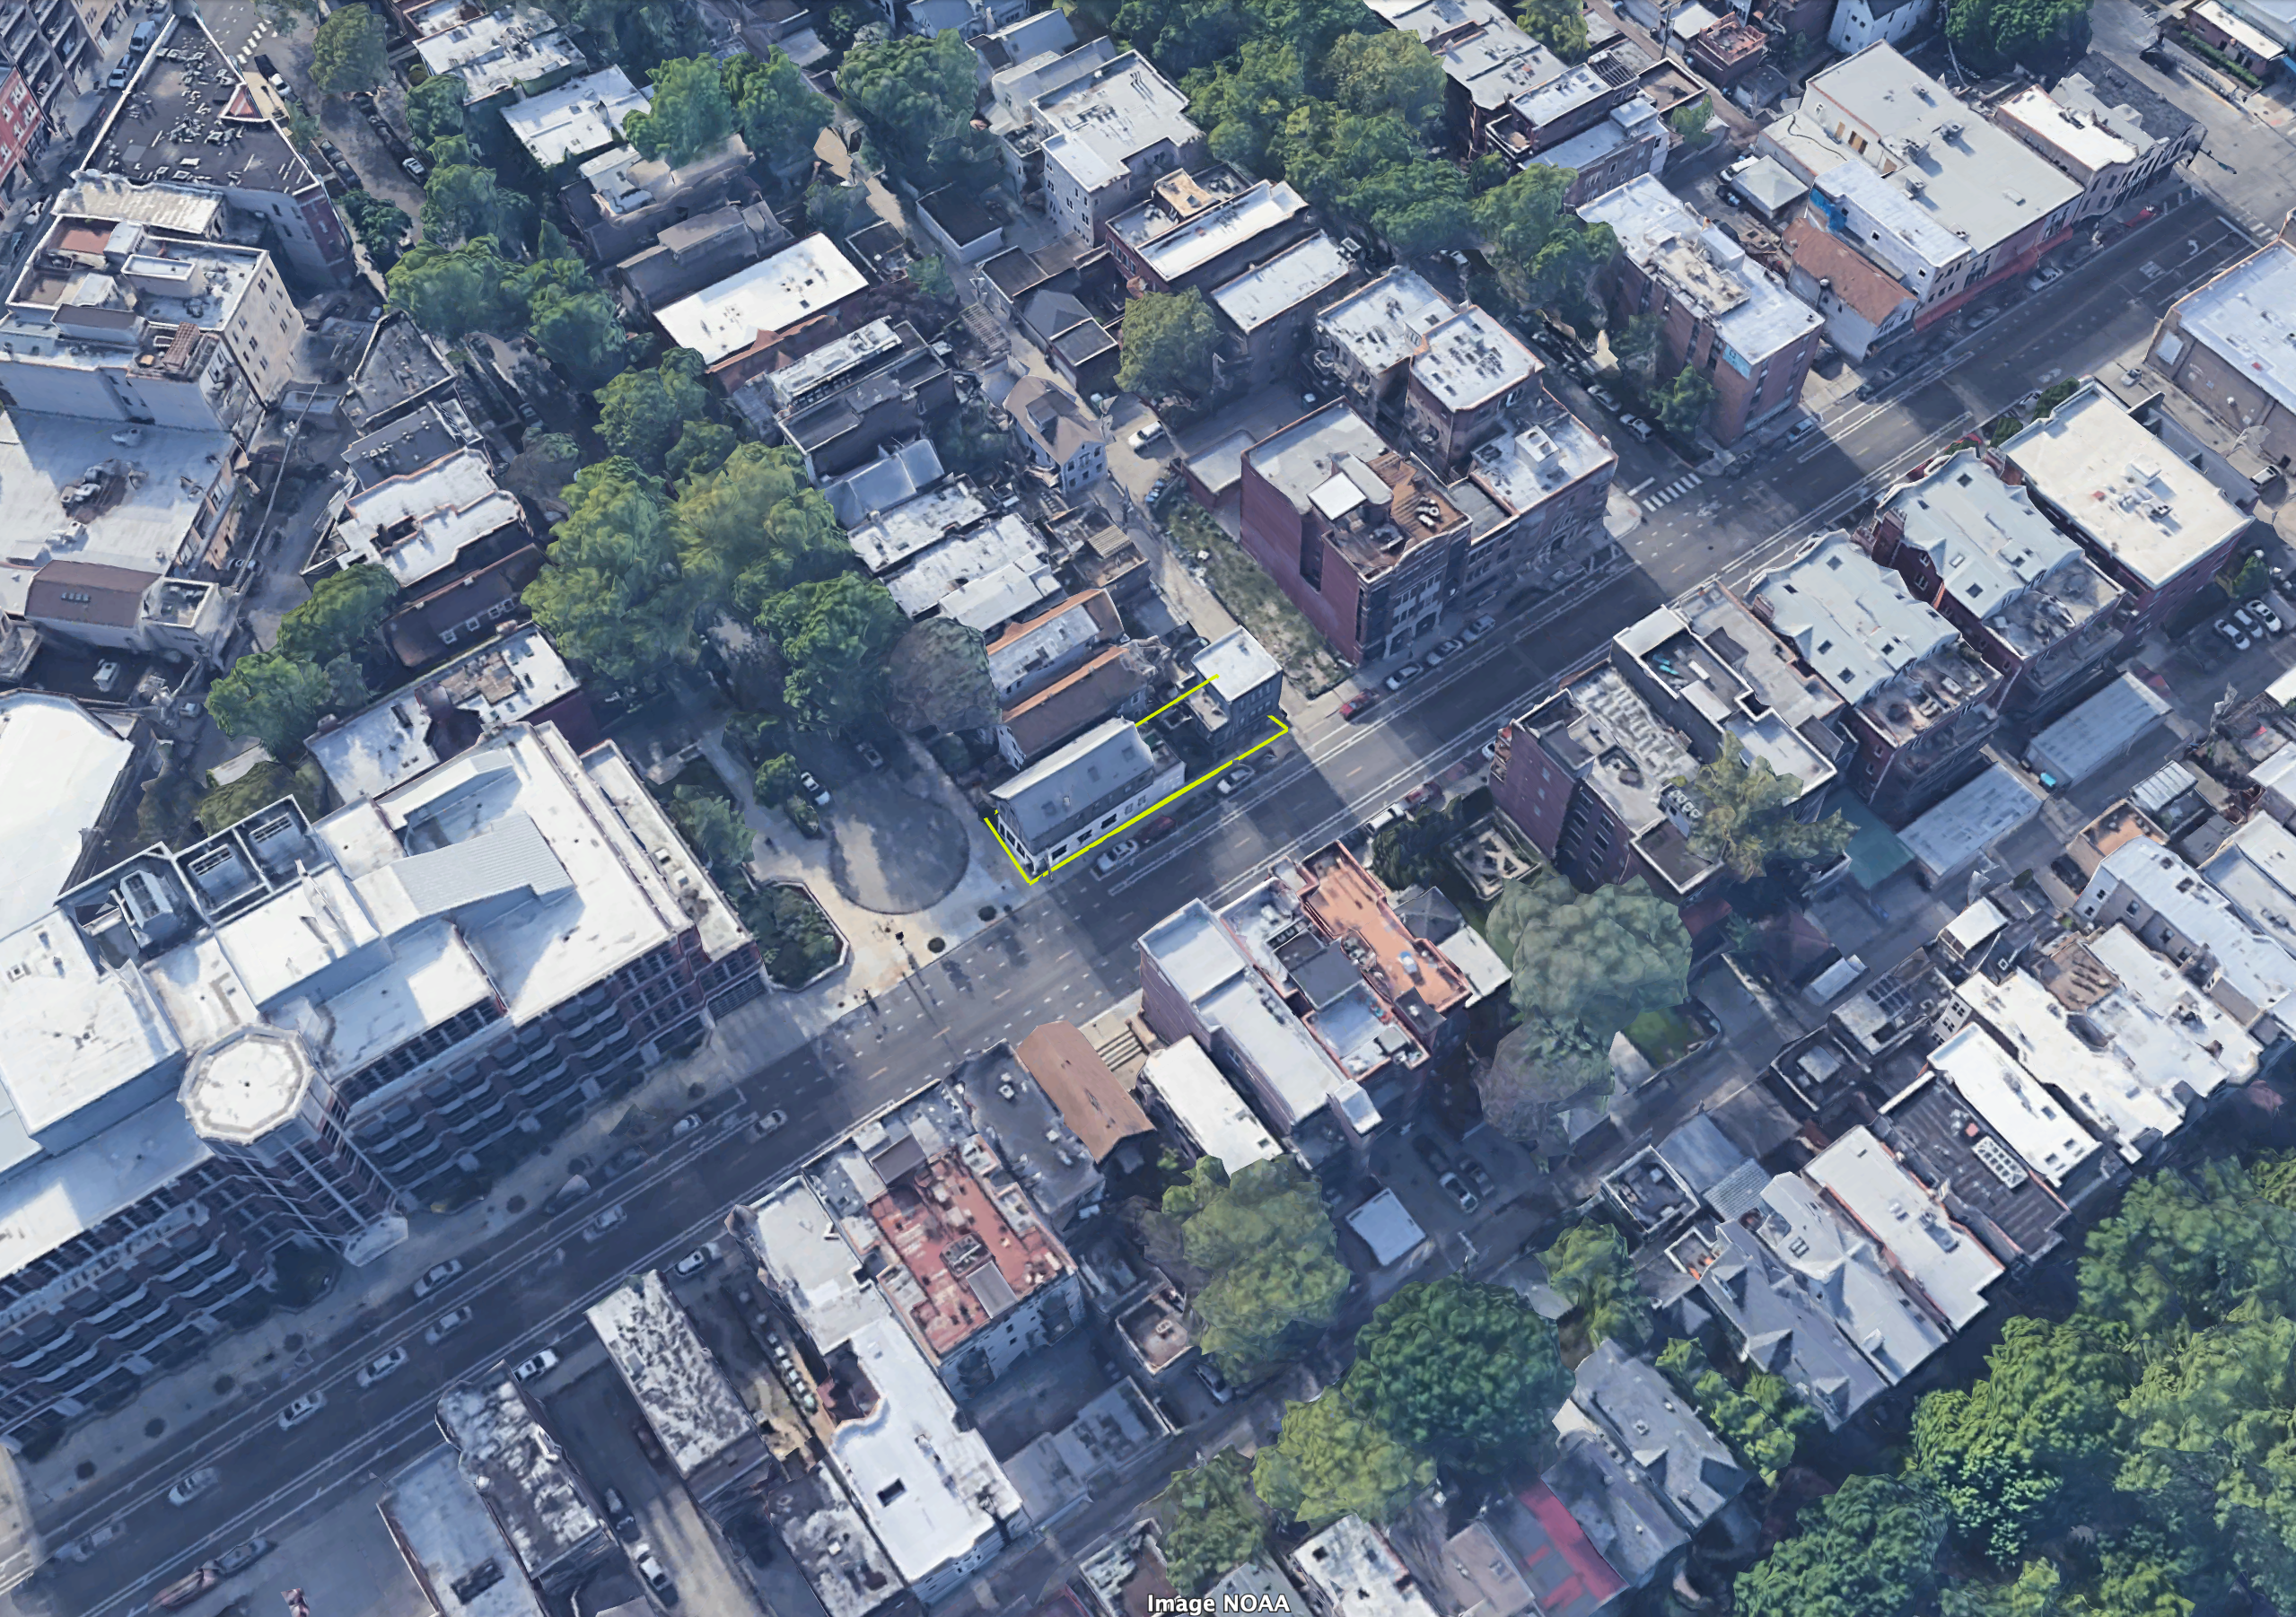 Aerial view of 2500 N Halsted Street, aka 800 W Altgeld Street (highlighted in yellow)